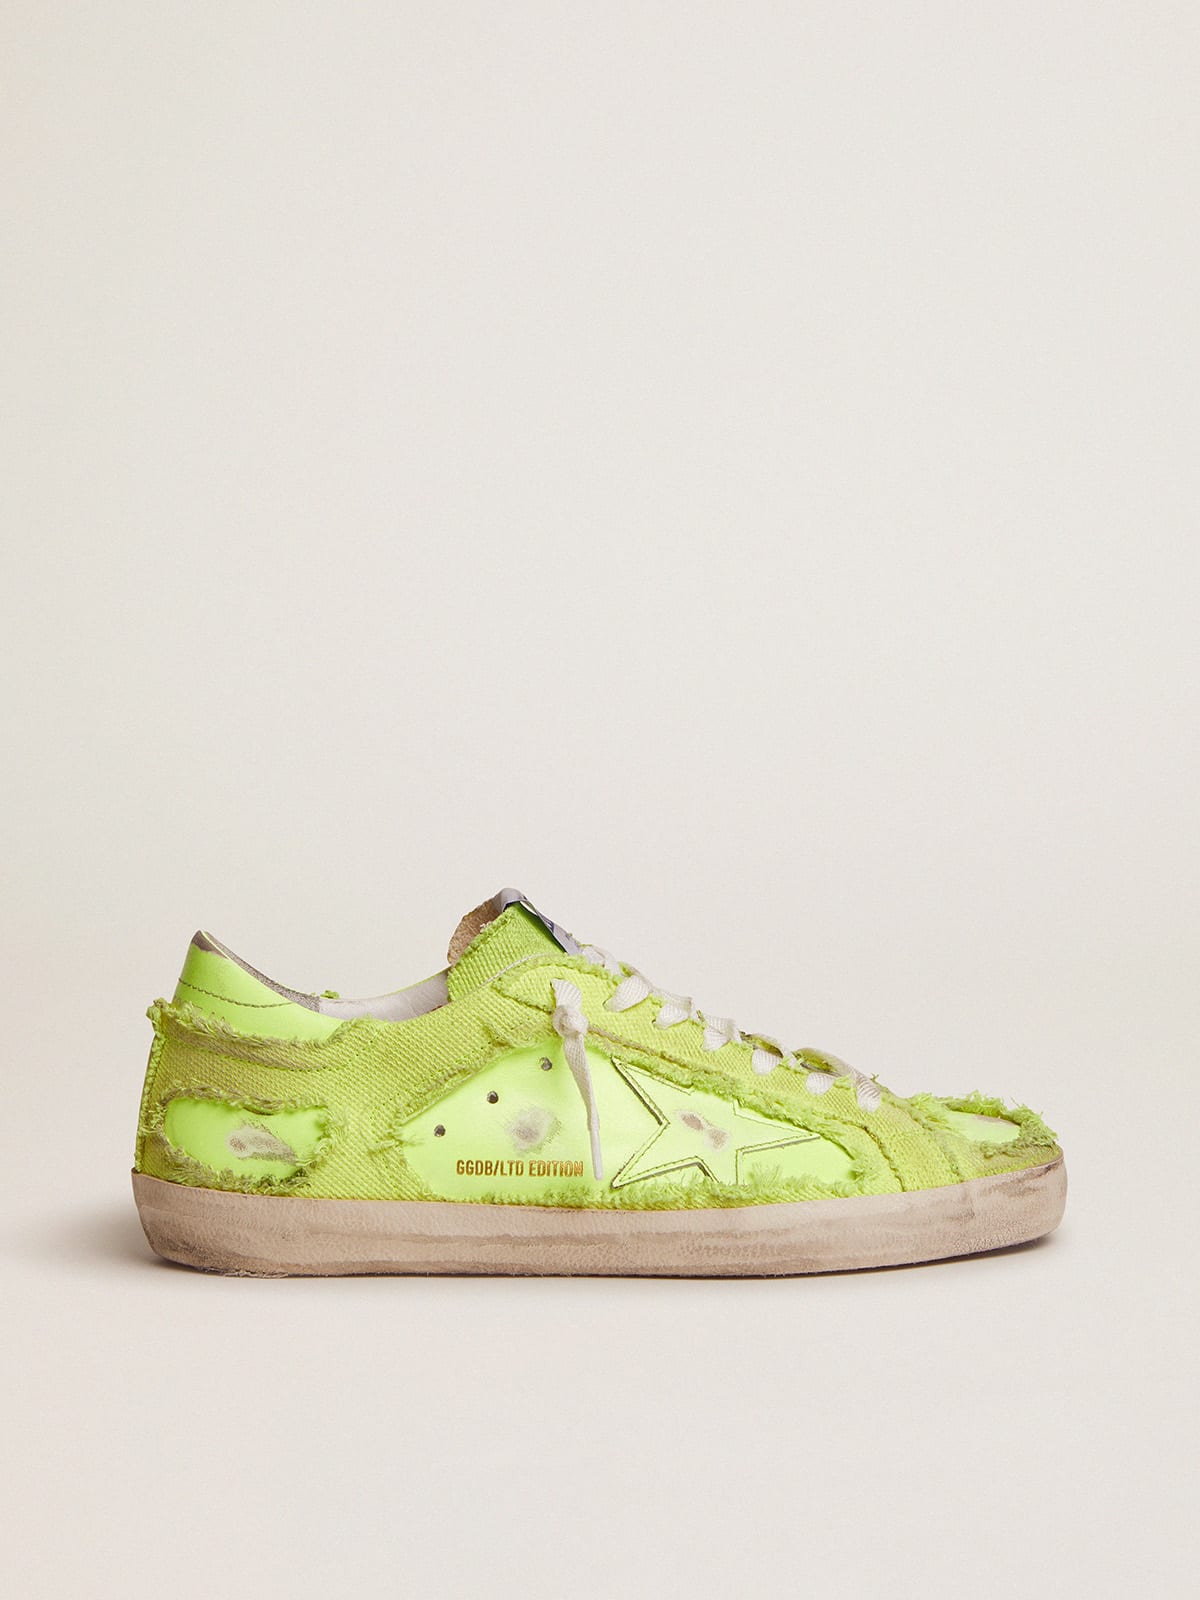 Golden Goose - Women’s Super-Star LAB sneakers in fluorescent yellow leather and canvas in 